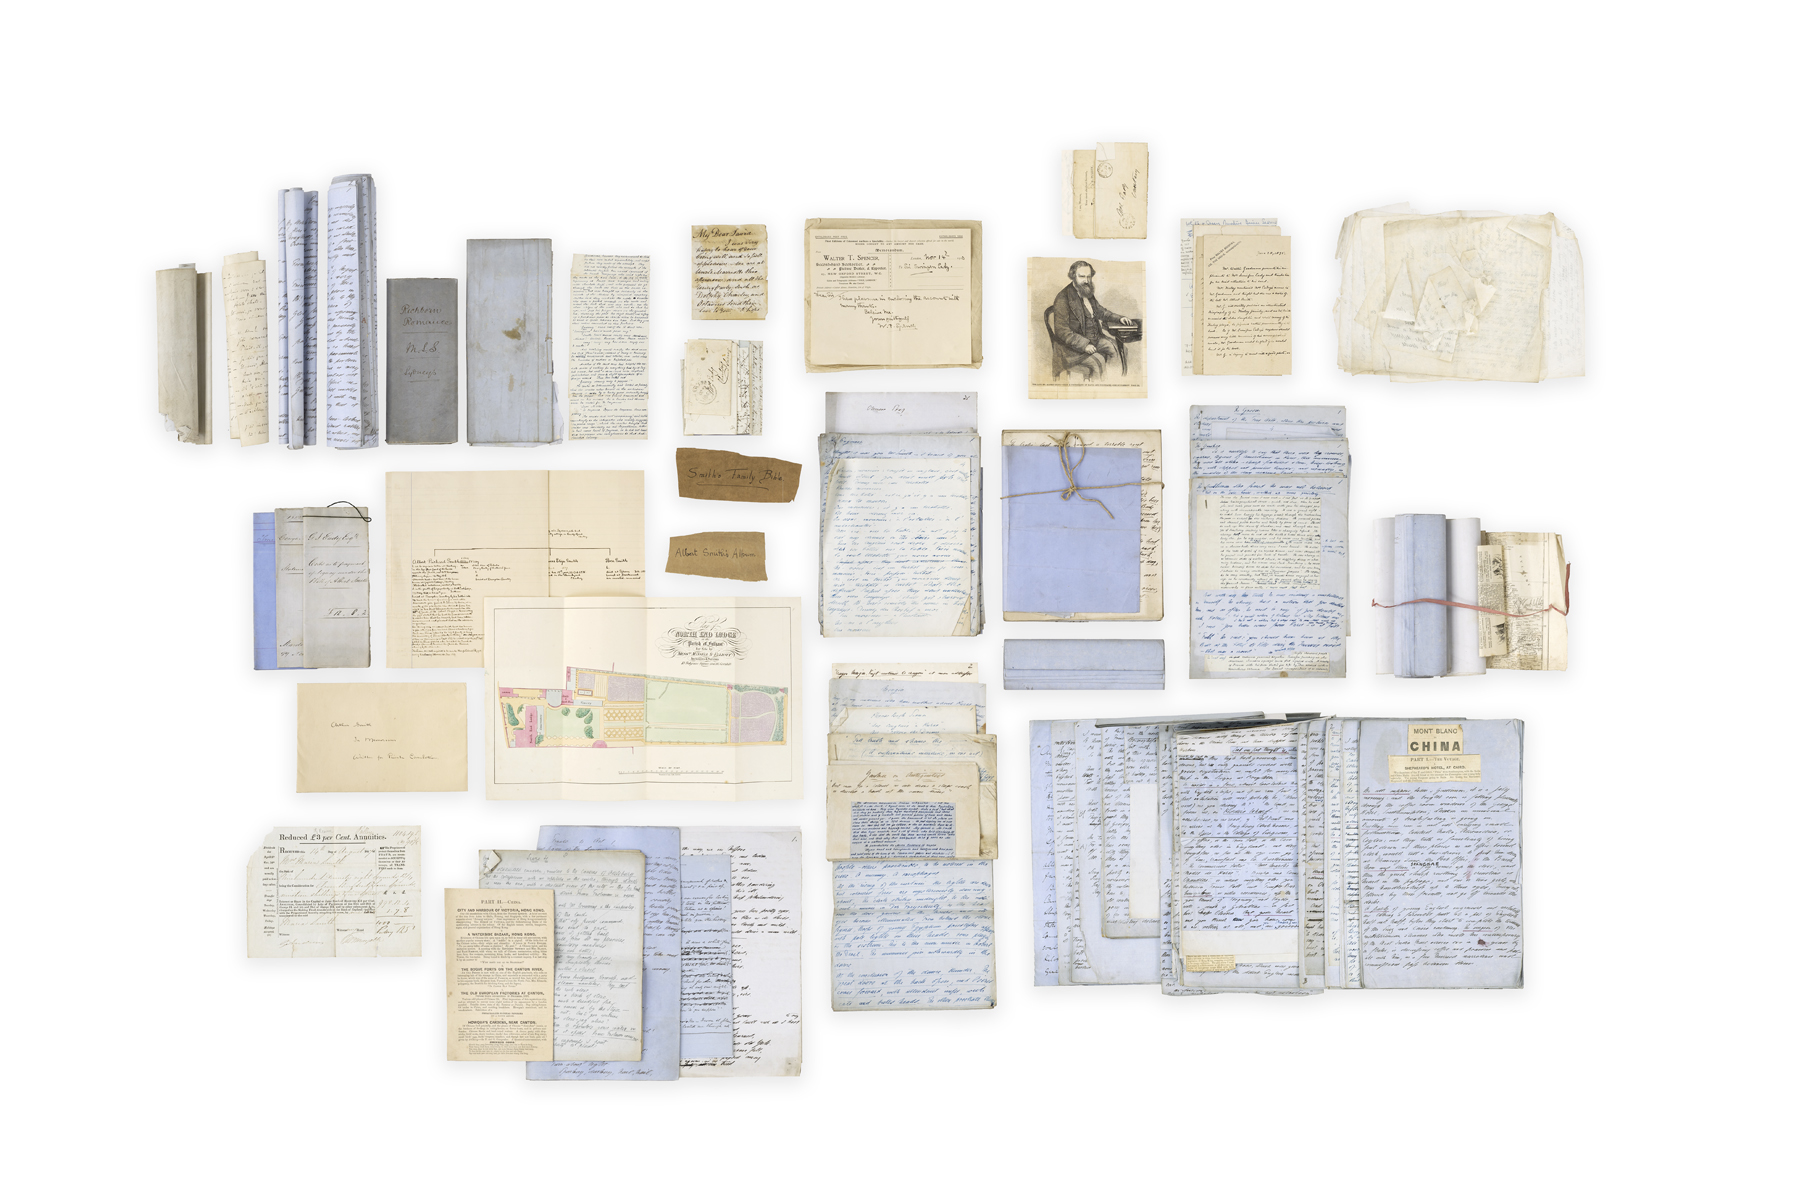 A large archive of printed and manuscript material, including drafts of shows and lectures, including portions of Mont Blanc, Mont Blanc to China, poetry, dramatic pieces, a juvenile poem, letters to his sister Laura, a copy of his will.